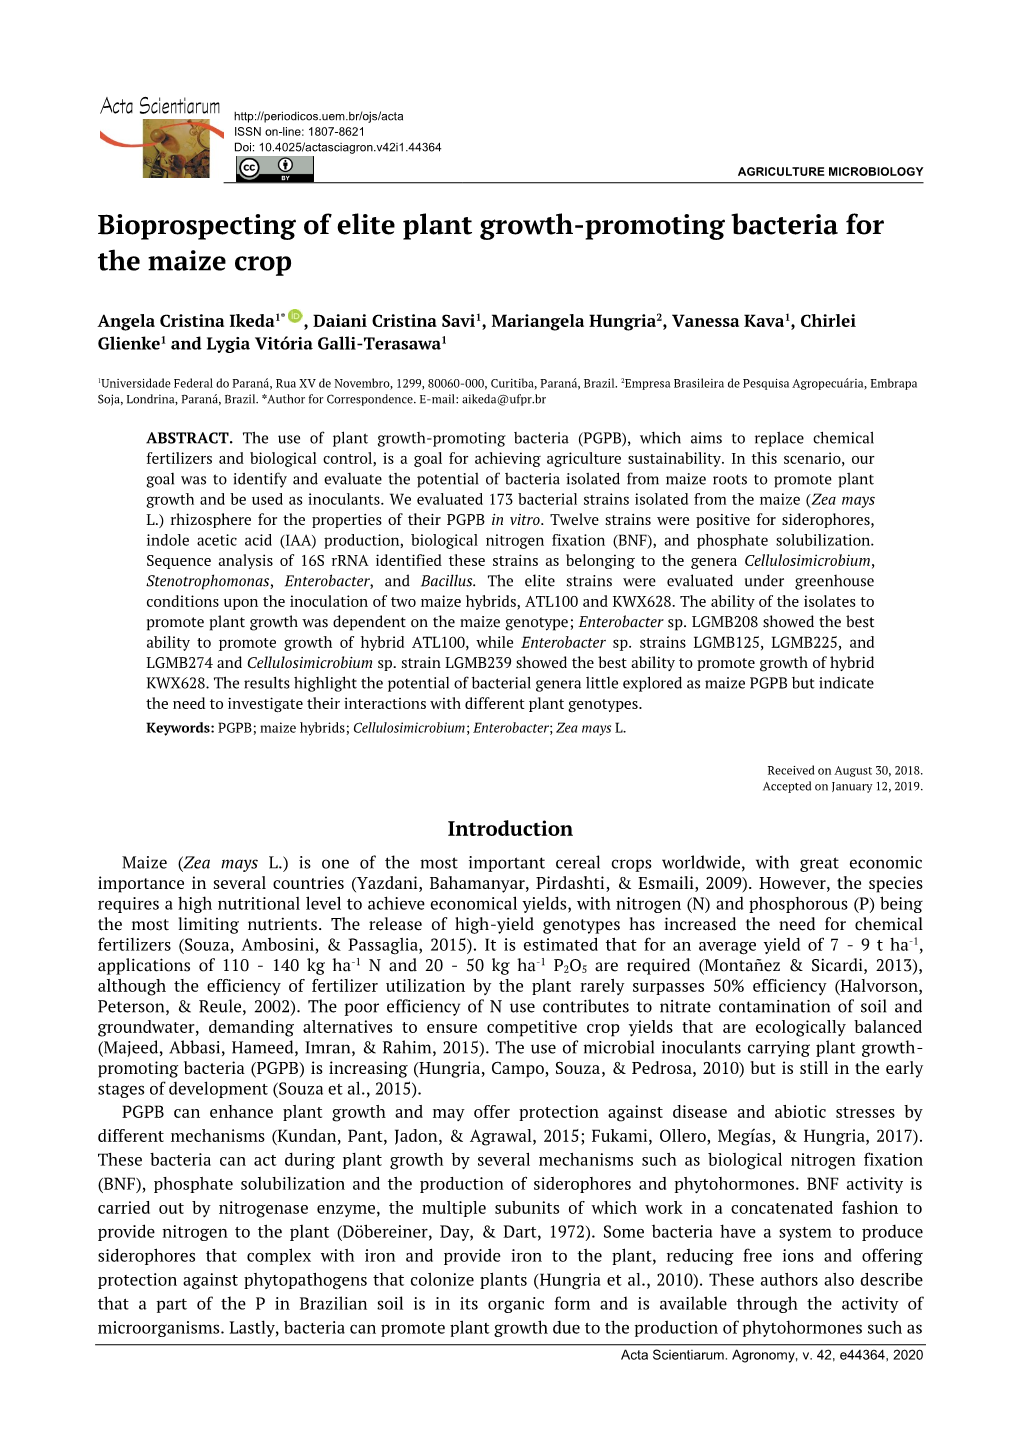 Bioprospecting of Elite Plant Growth-Promoting Bacteria for the Maize Crop